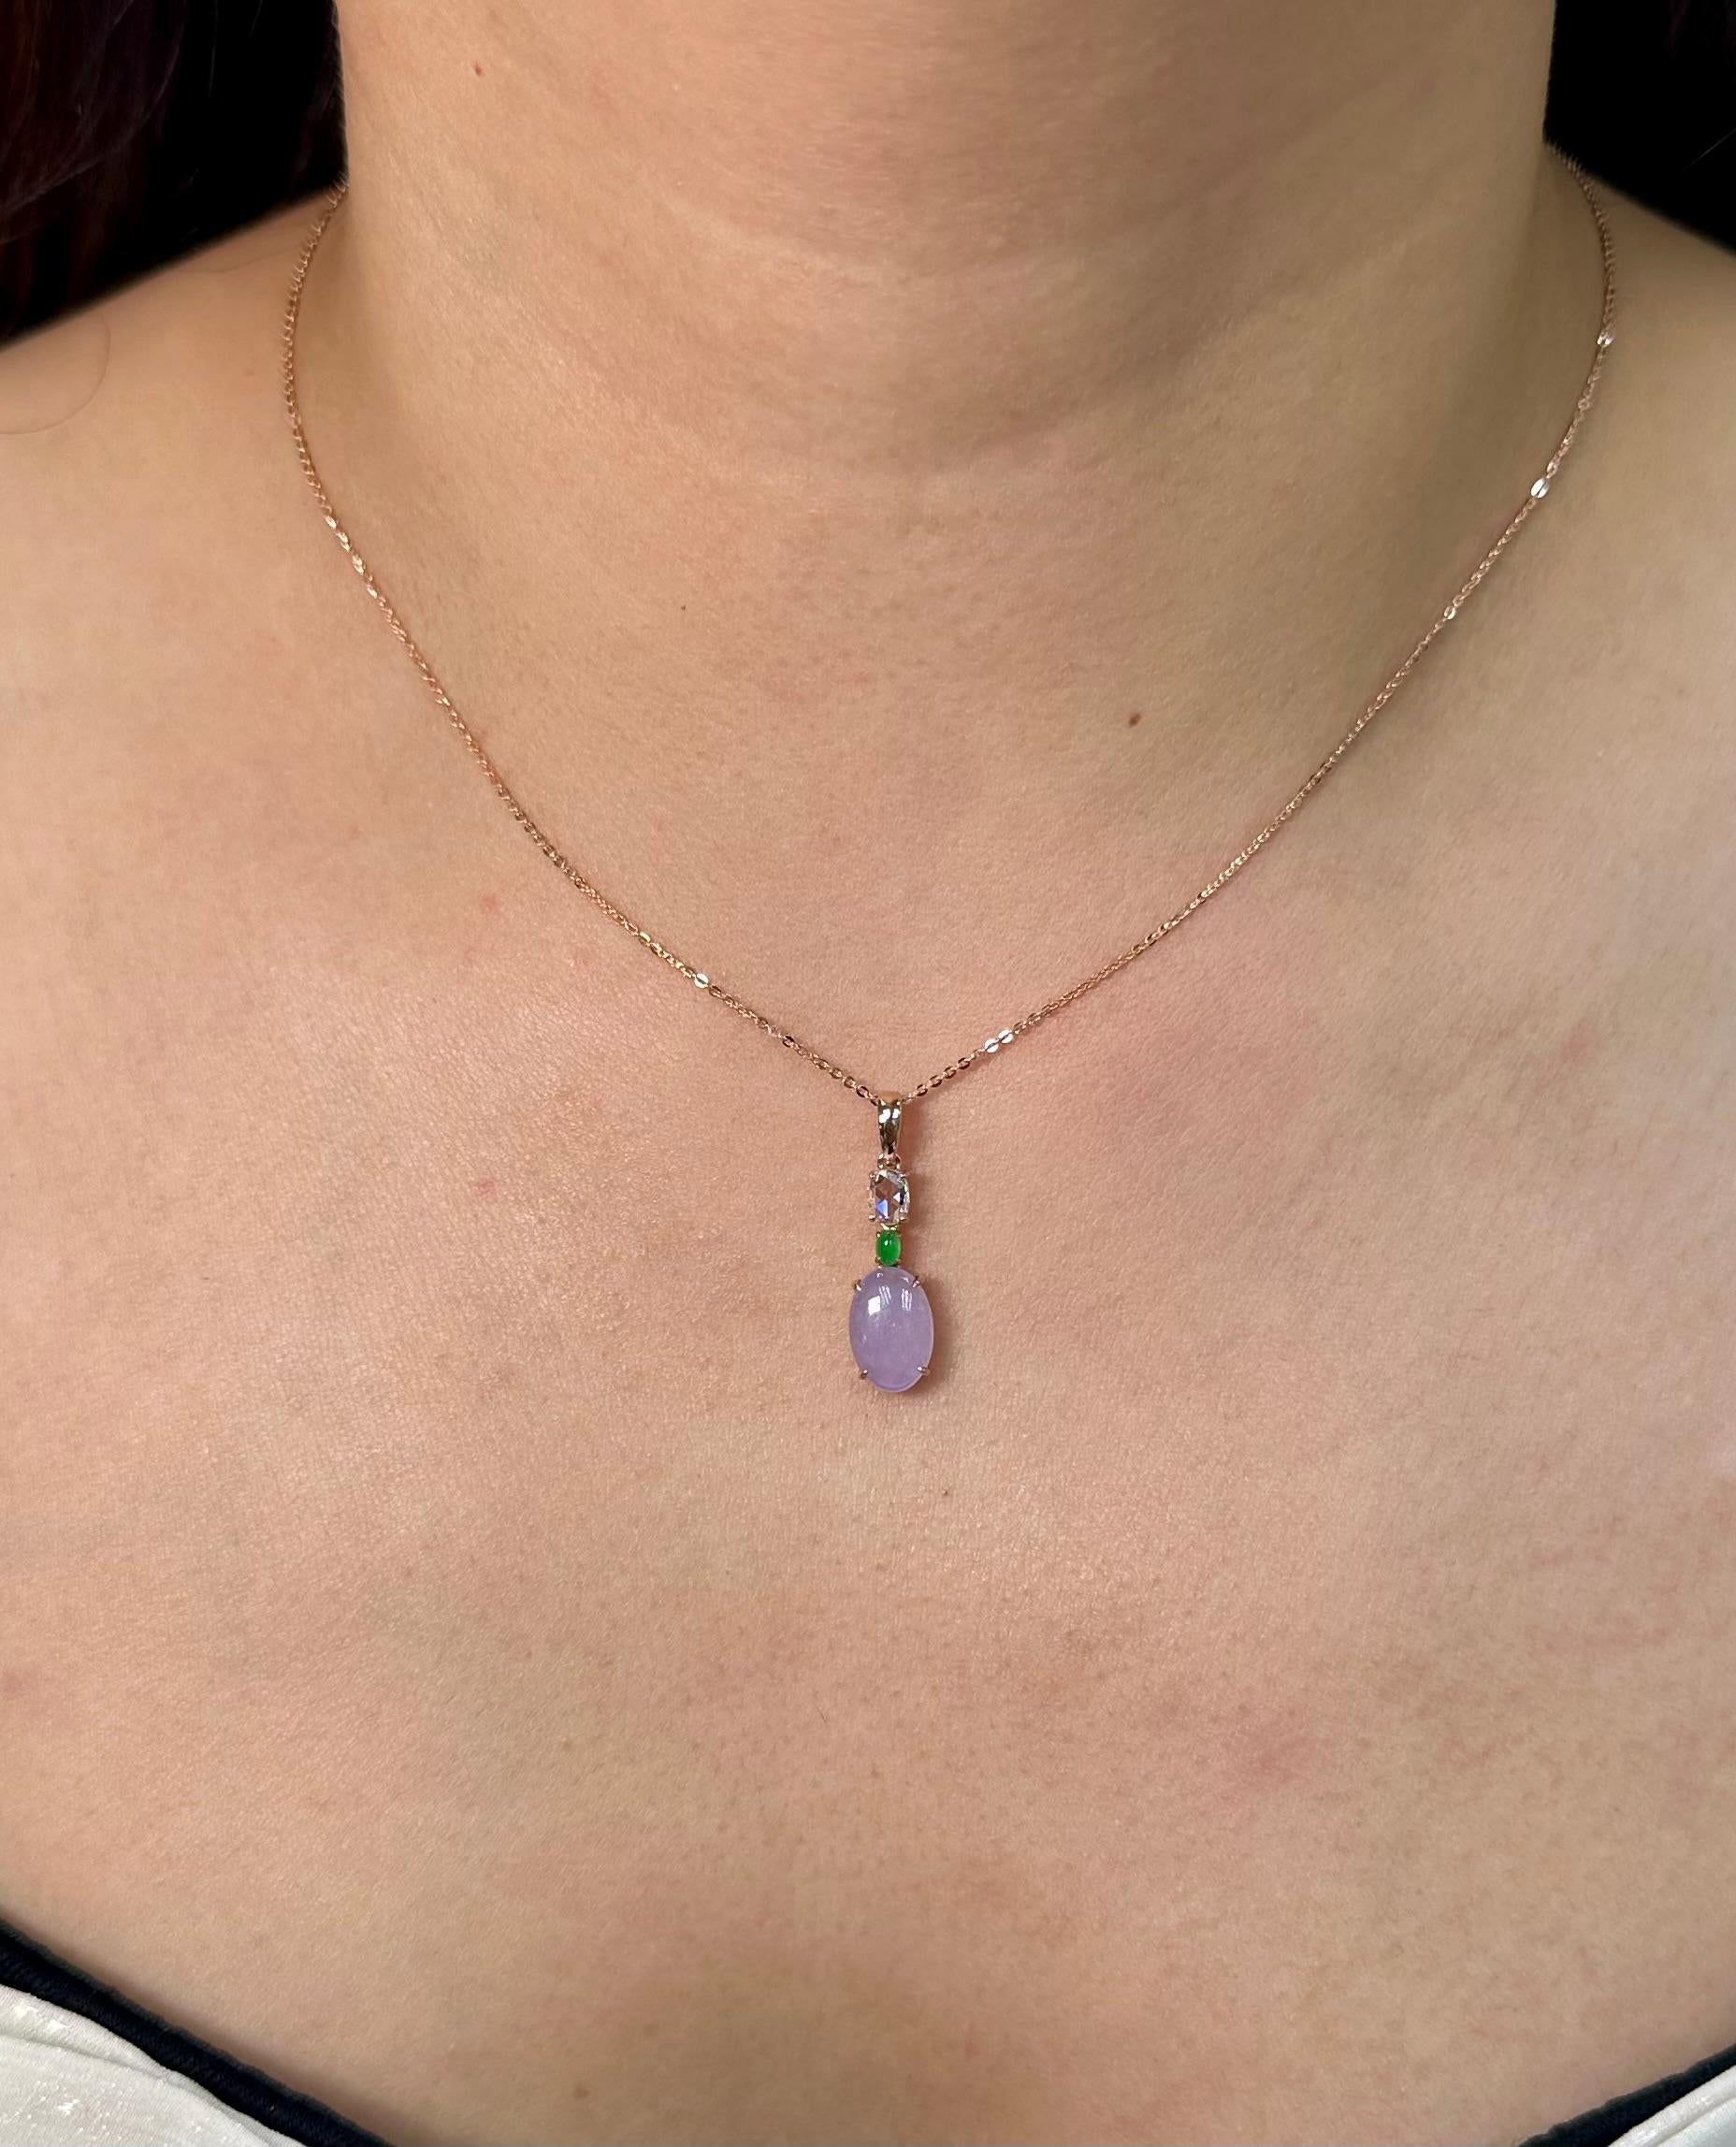 Please check out the HD video! The Jade is certified to be natural. The pendant is set in 18k rose gold with one new rose cut diamond. The new rose cut diamond weights 0.26 cts. The untreated / un-enhanced natural lavender jade is translucent. The